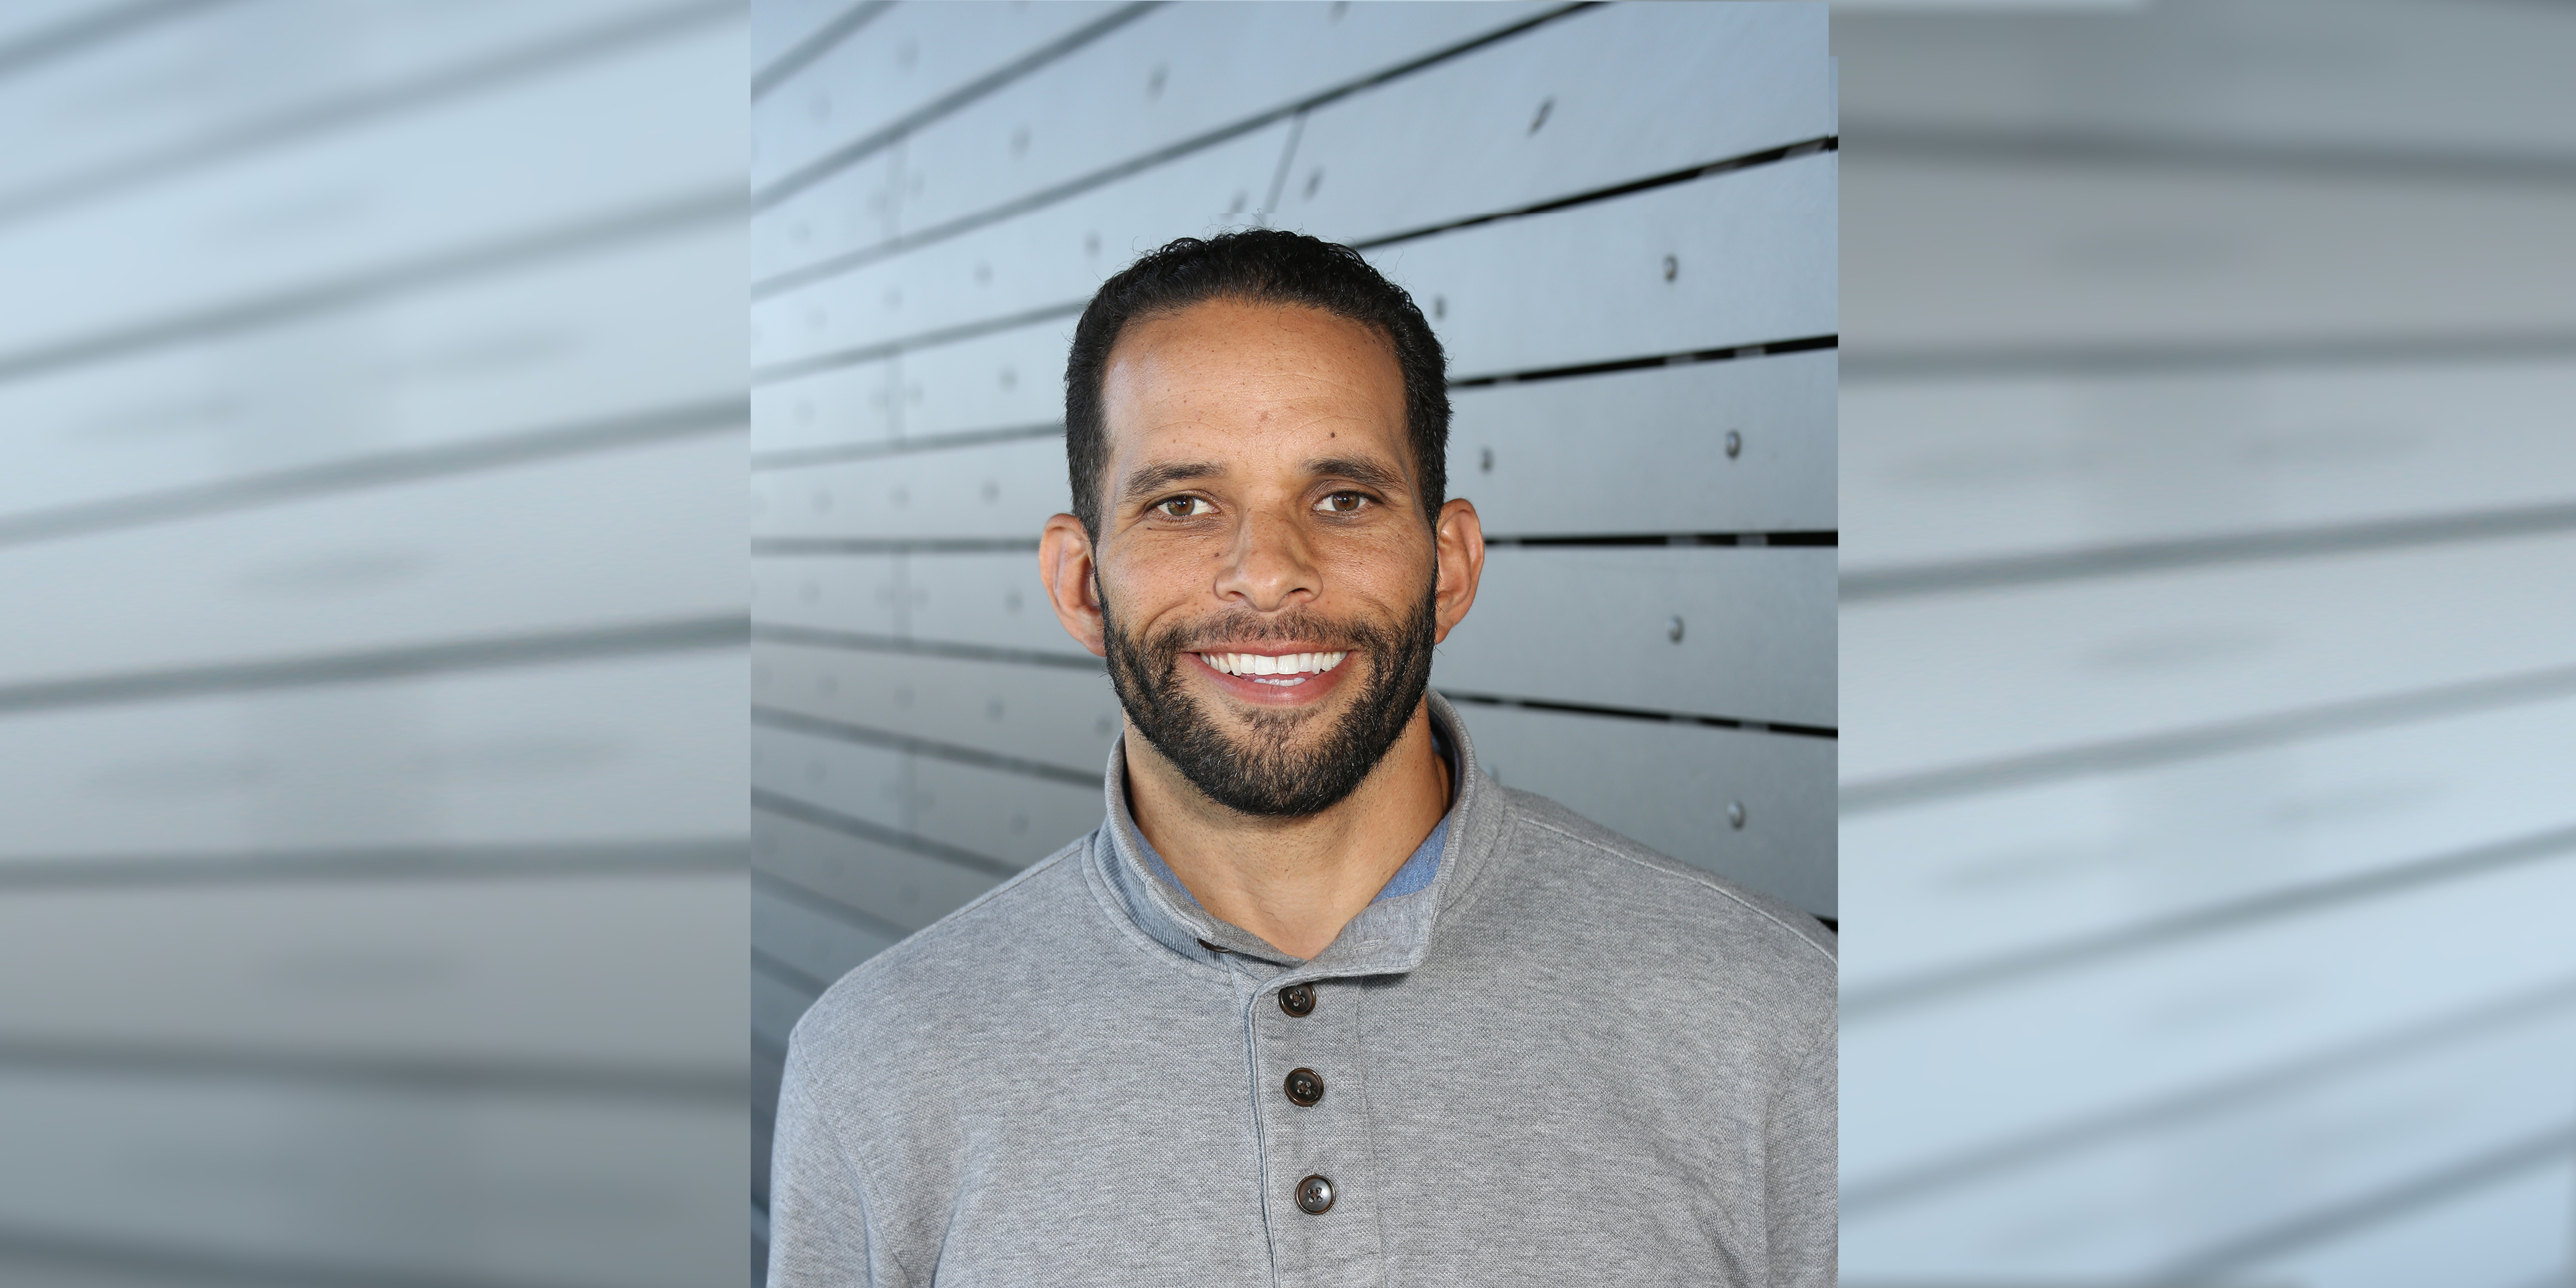 From the NFL to the Boardroom – How Next Play Capital Founder Ryan Nece Used Online Learning to Up His Negotiations Game